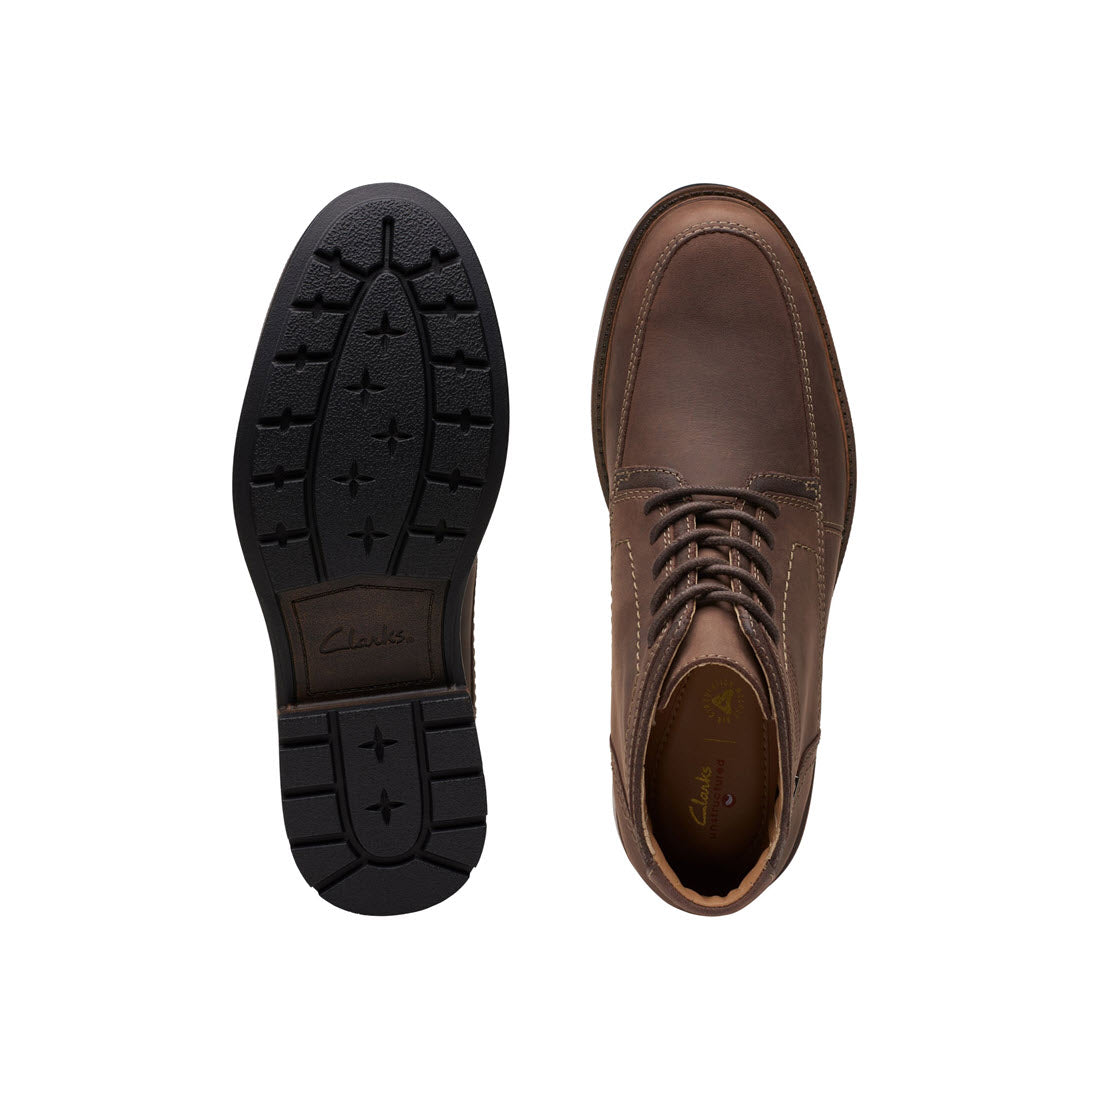 A pair of Clark&#39;s Unshire Hi WP Dark Brown Leather shoes, designed with smart-casual aesthetics, displayed top down, with one shoe flipped to show the sole.